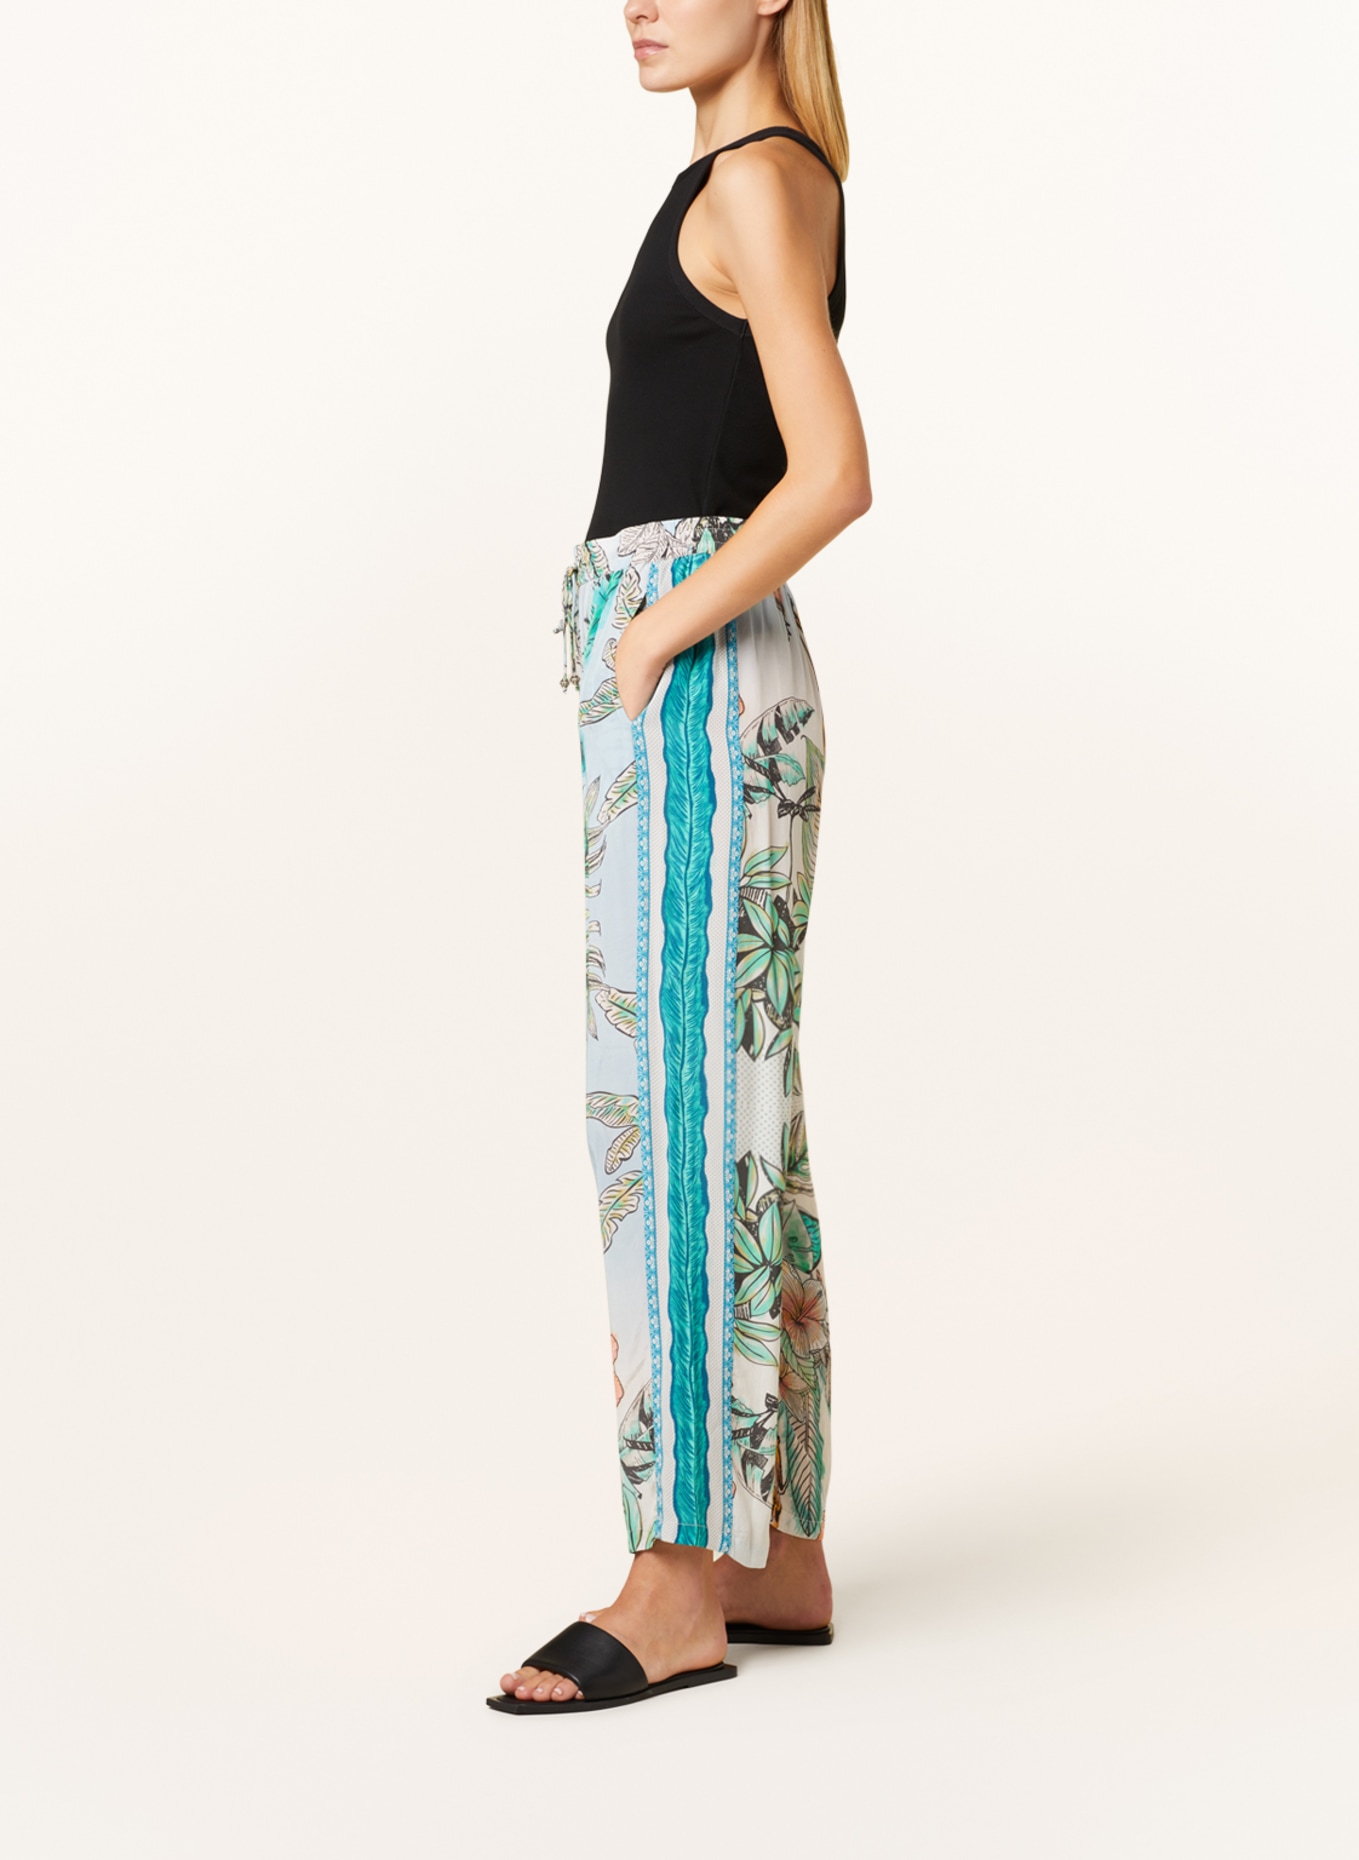 Princess GOES HOLLYWOOD Trousers, Color: LIGHT BLUE/ LIGHT GREEN/ TEAL (Image 4)